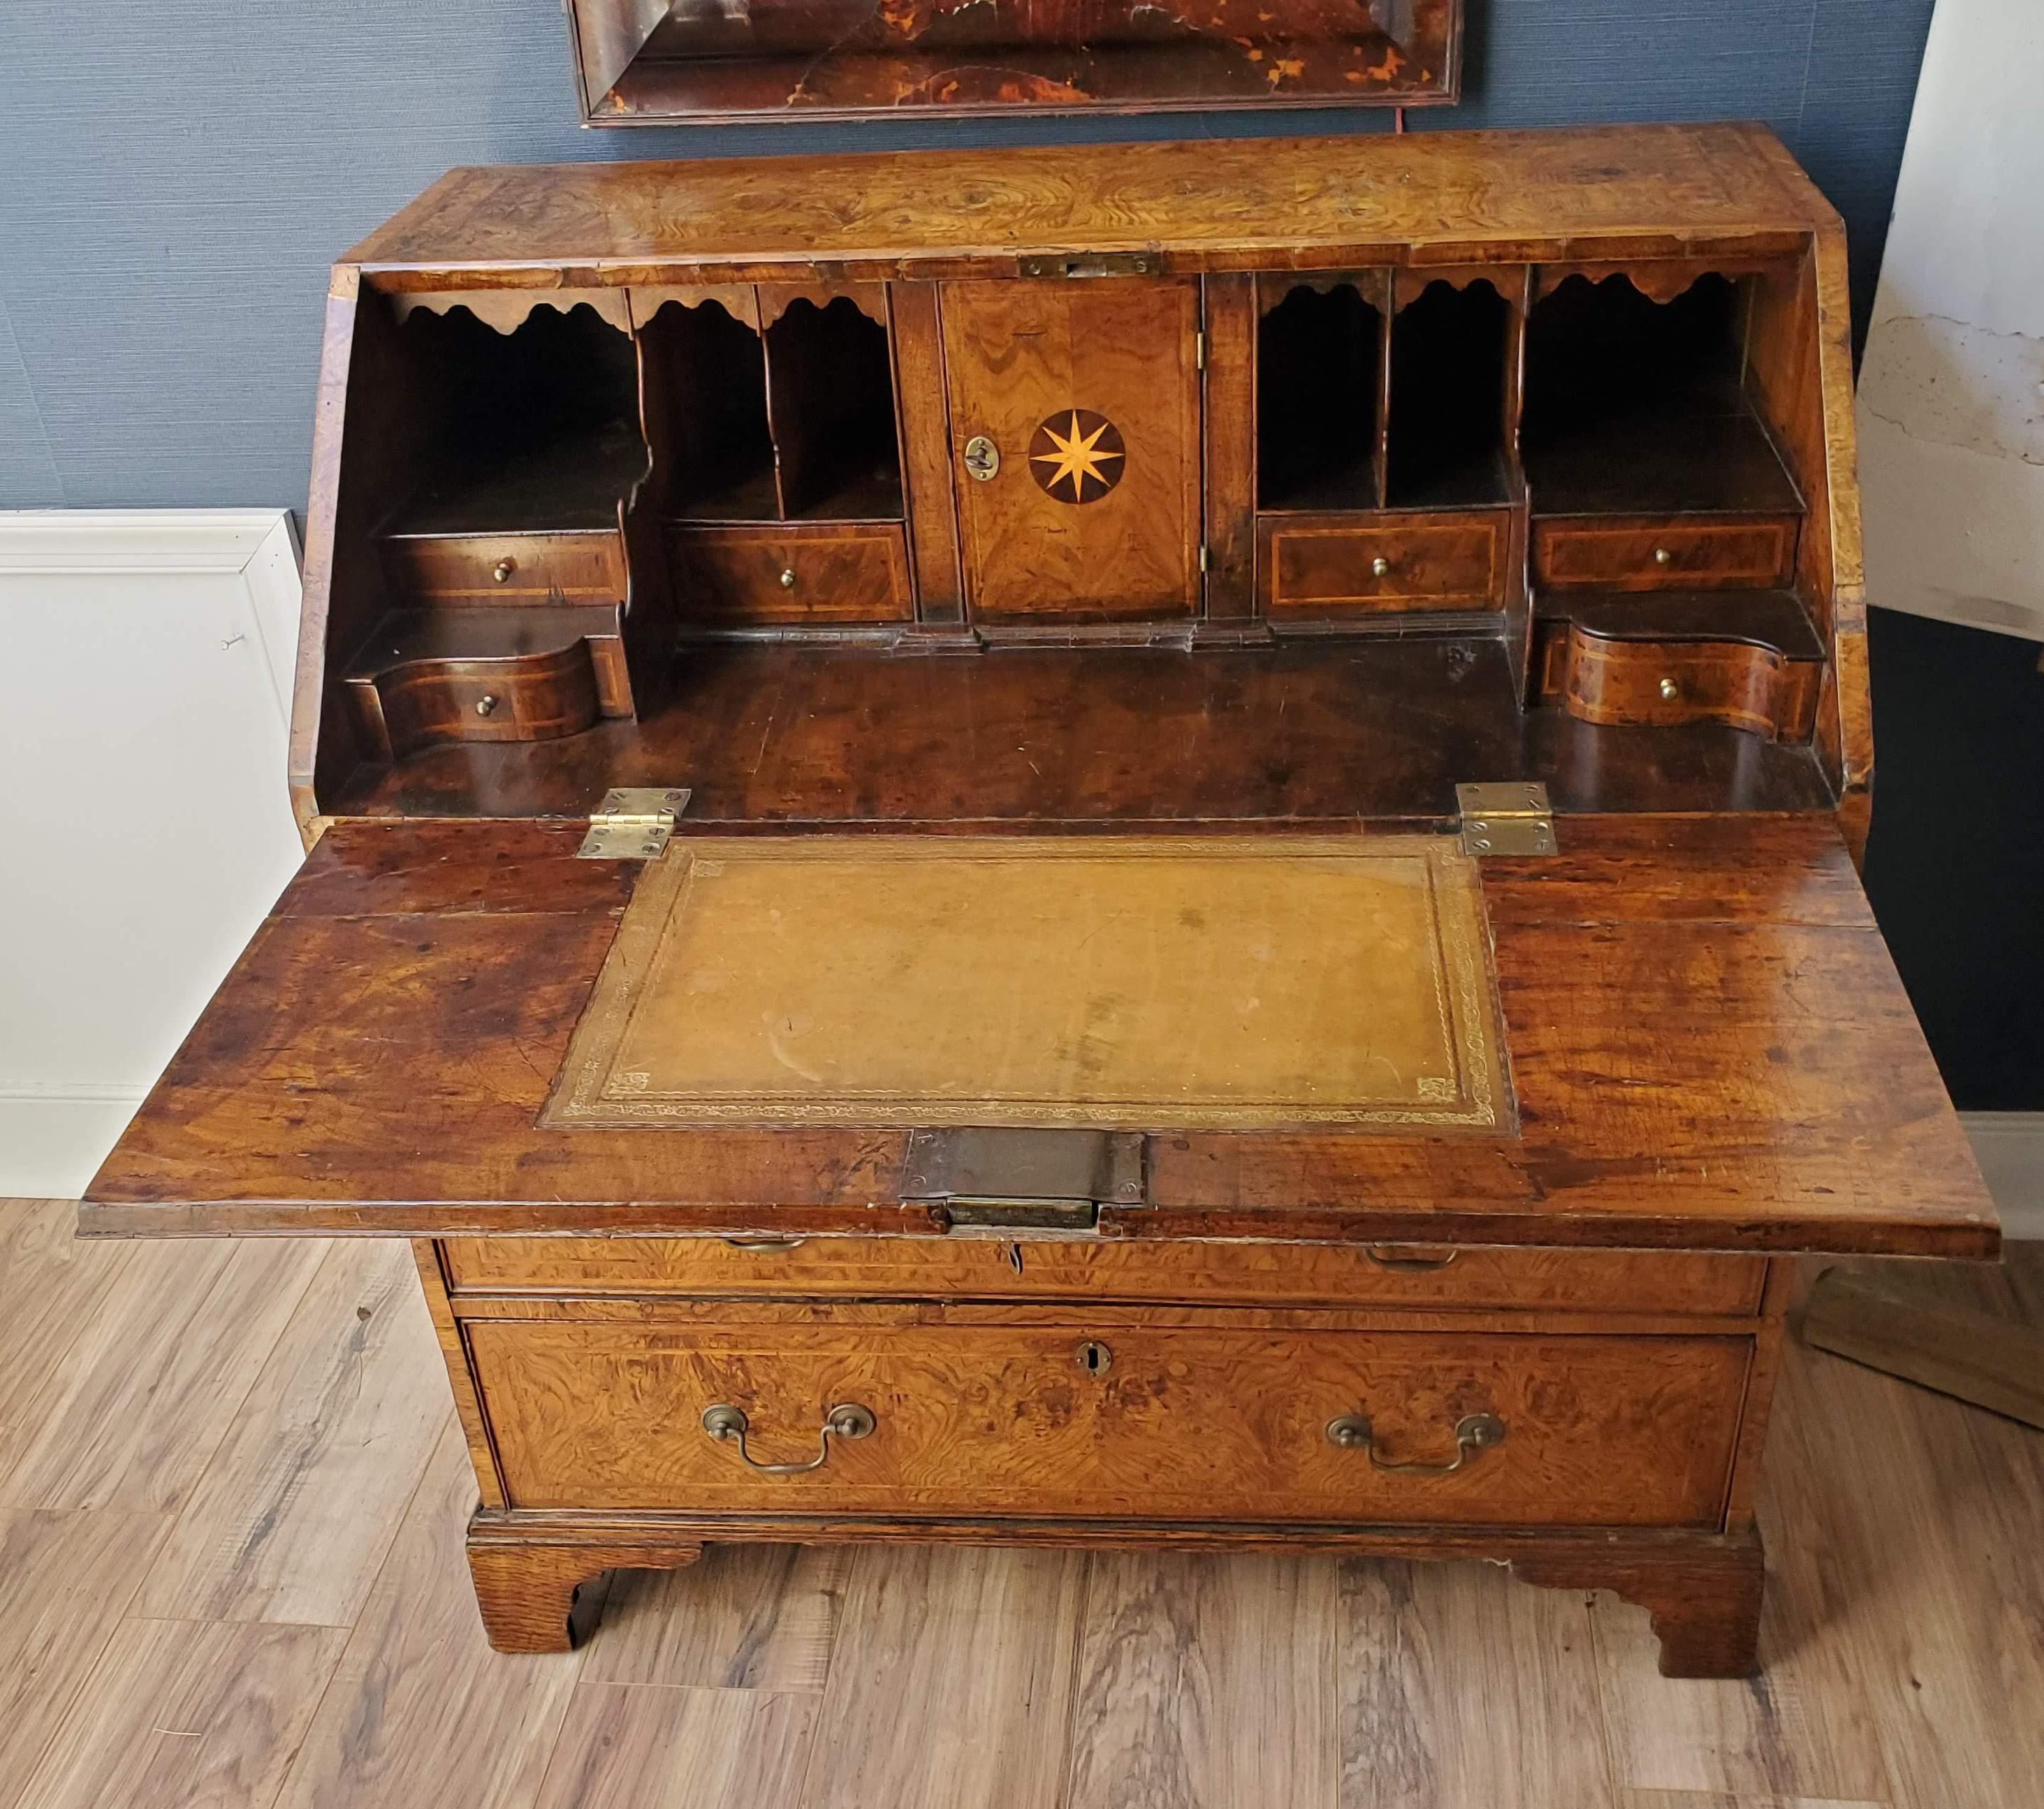 Extraordinary 18th Century George II Period Slant Top desk. Made predominately of highly figured Burled Ash with the original deep patination and rich lustrous color. Veneer is “Book Matched” throughout with intricate “feather banding”. Three small